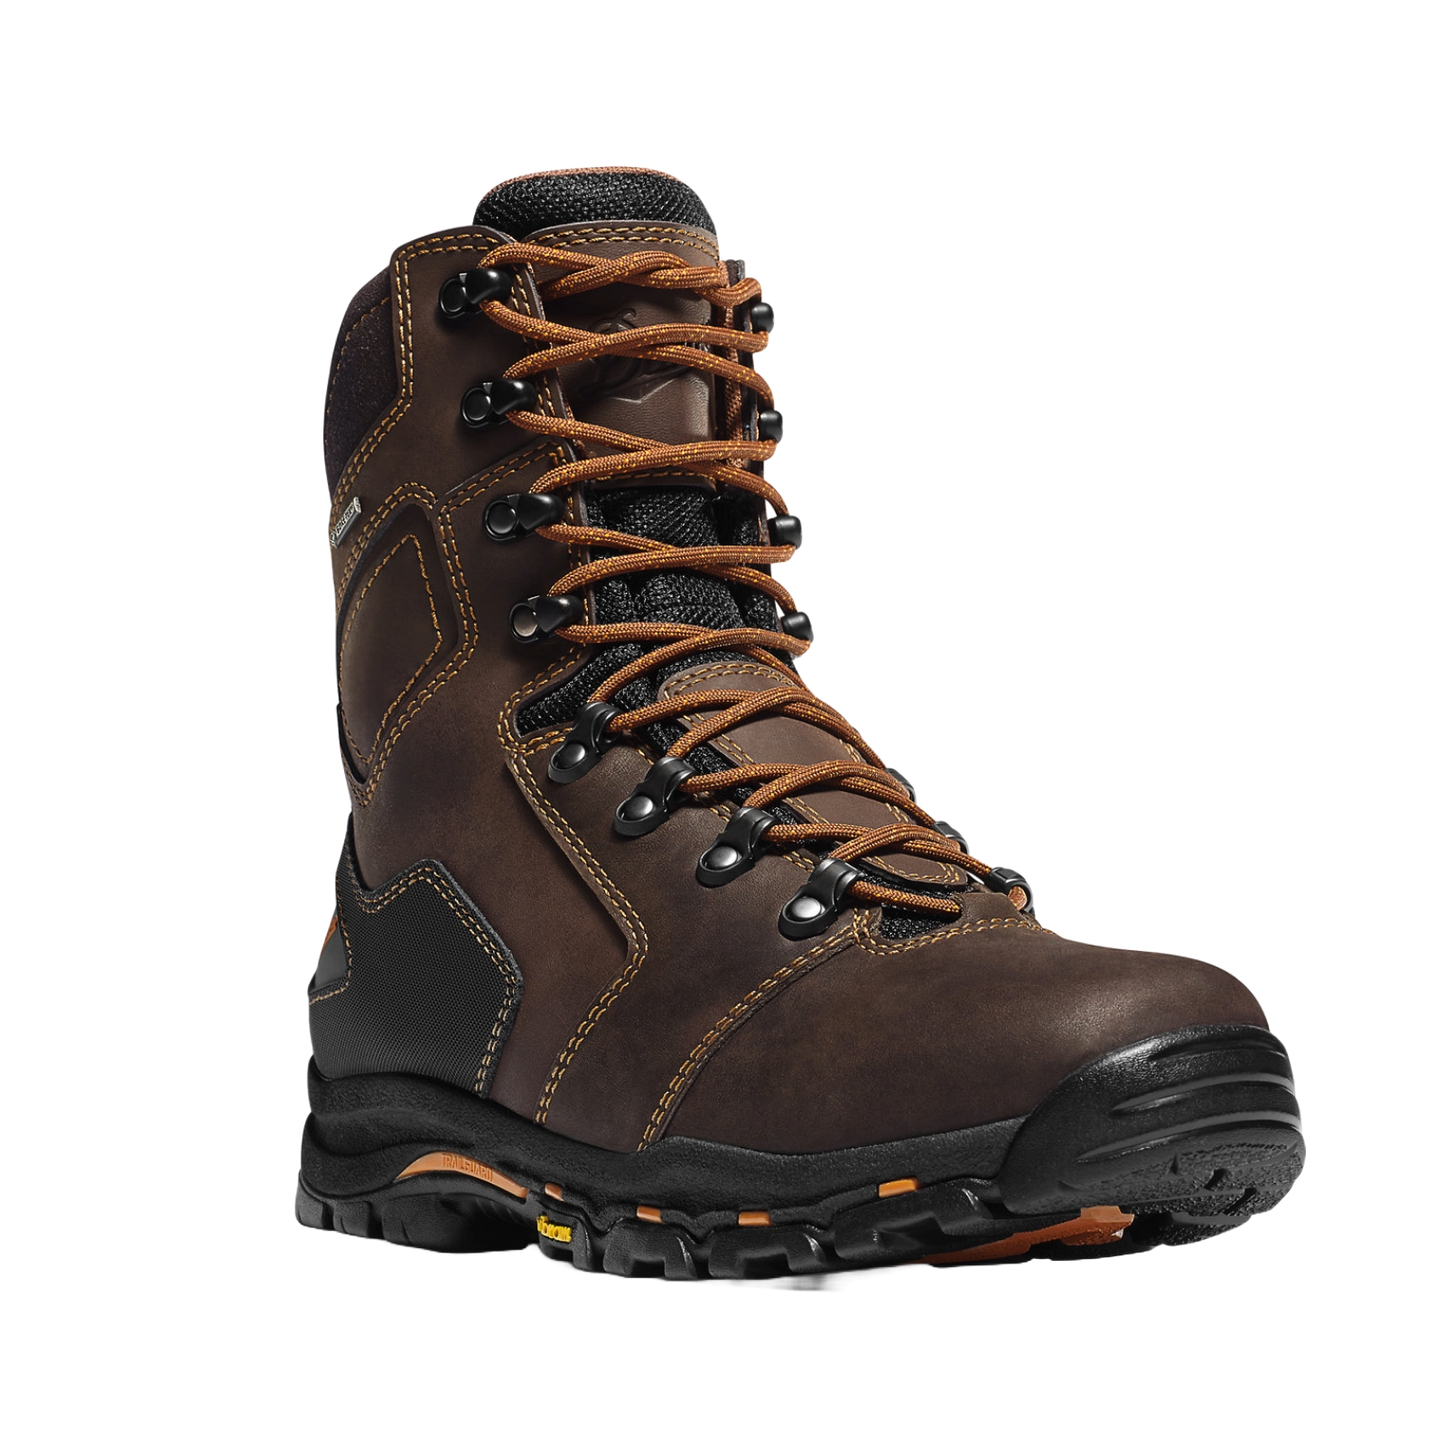 Danner Footwear Men's Vicious 8 Inch Composite Round Toe Work Boots 13868